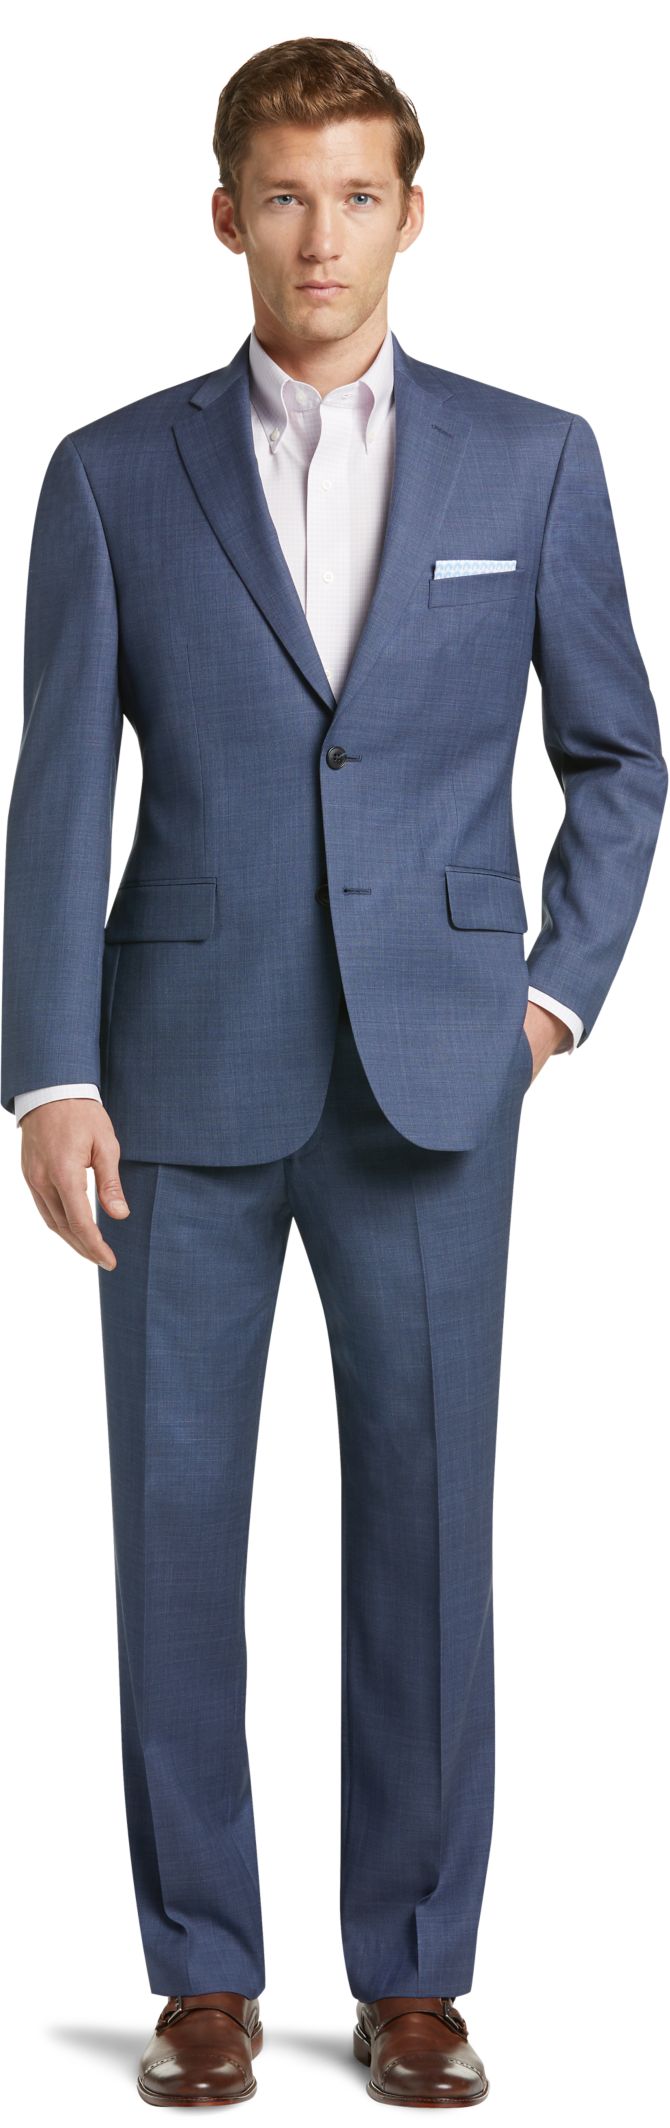 Traveler Collection Tailored Fit Plaid Suit - Traveler Suits | Jos A Bank